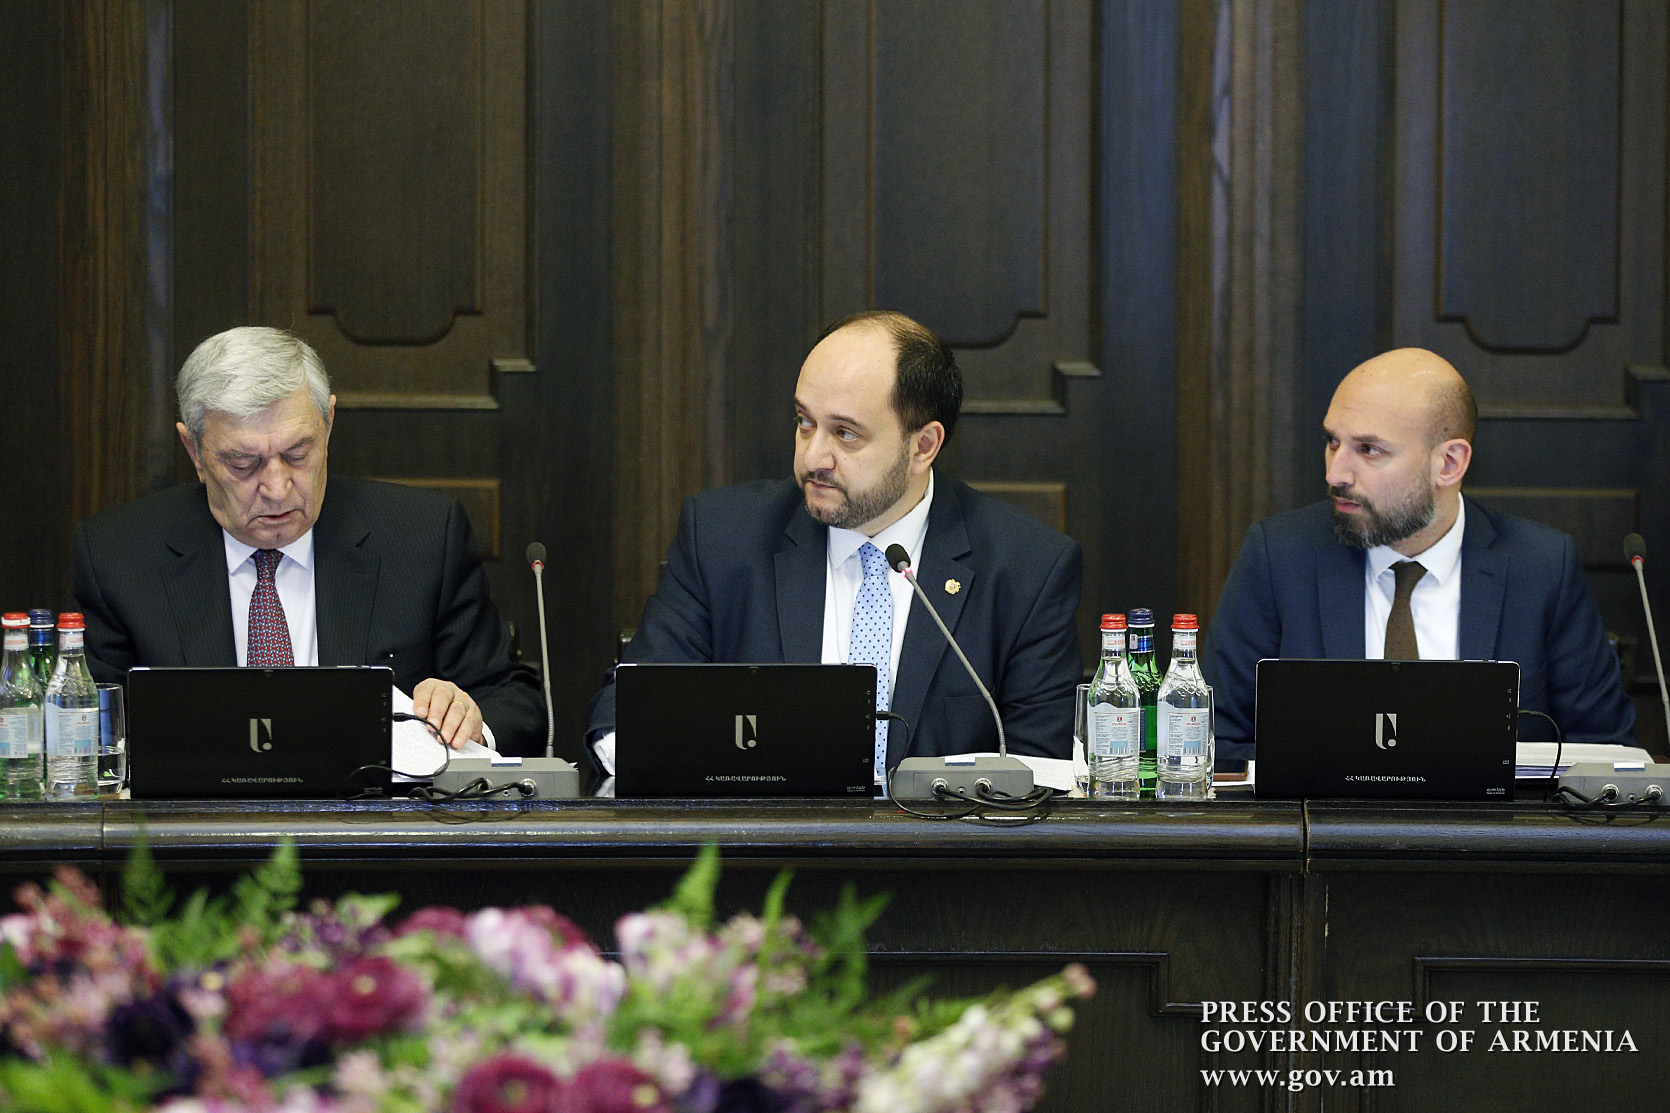 Nikol Pashinyan: ‘The unification of university, scientific and research activities should be the conceptual basis for solving problems in science’